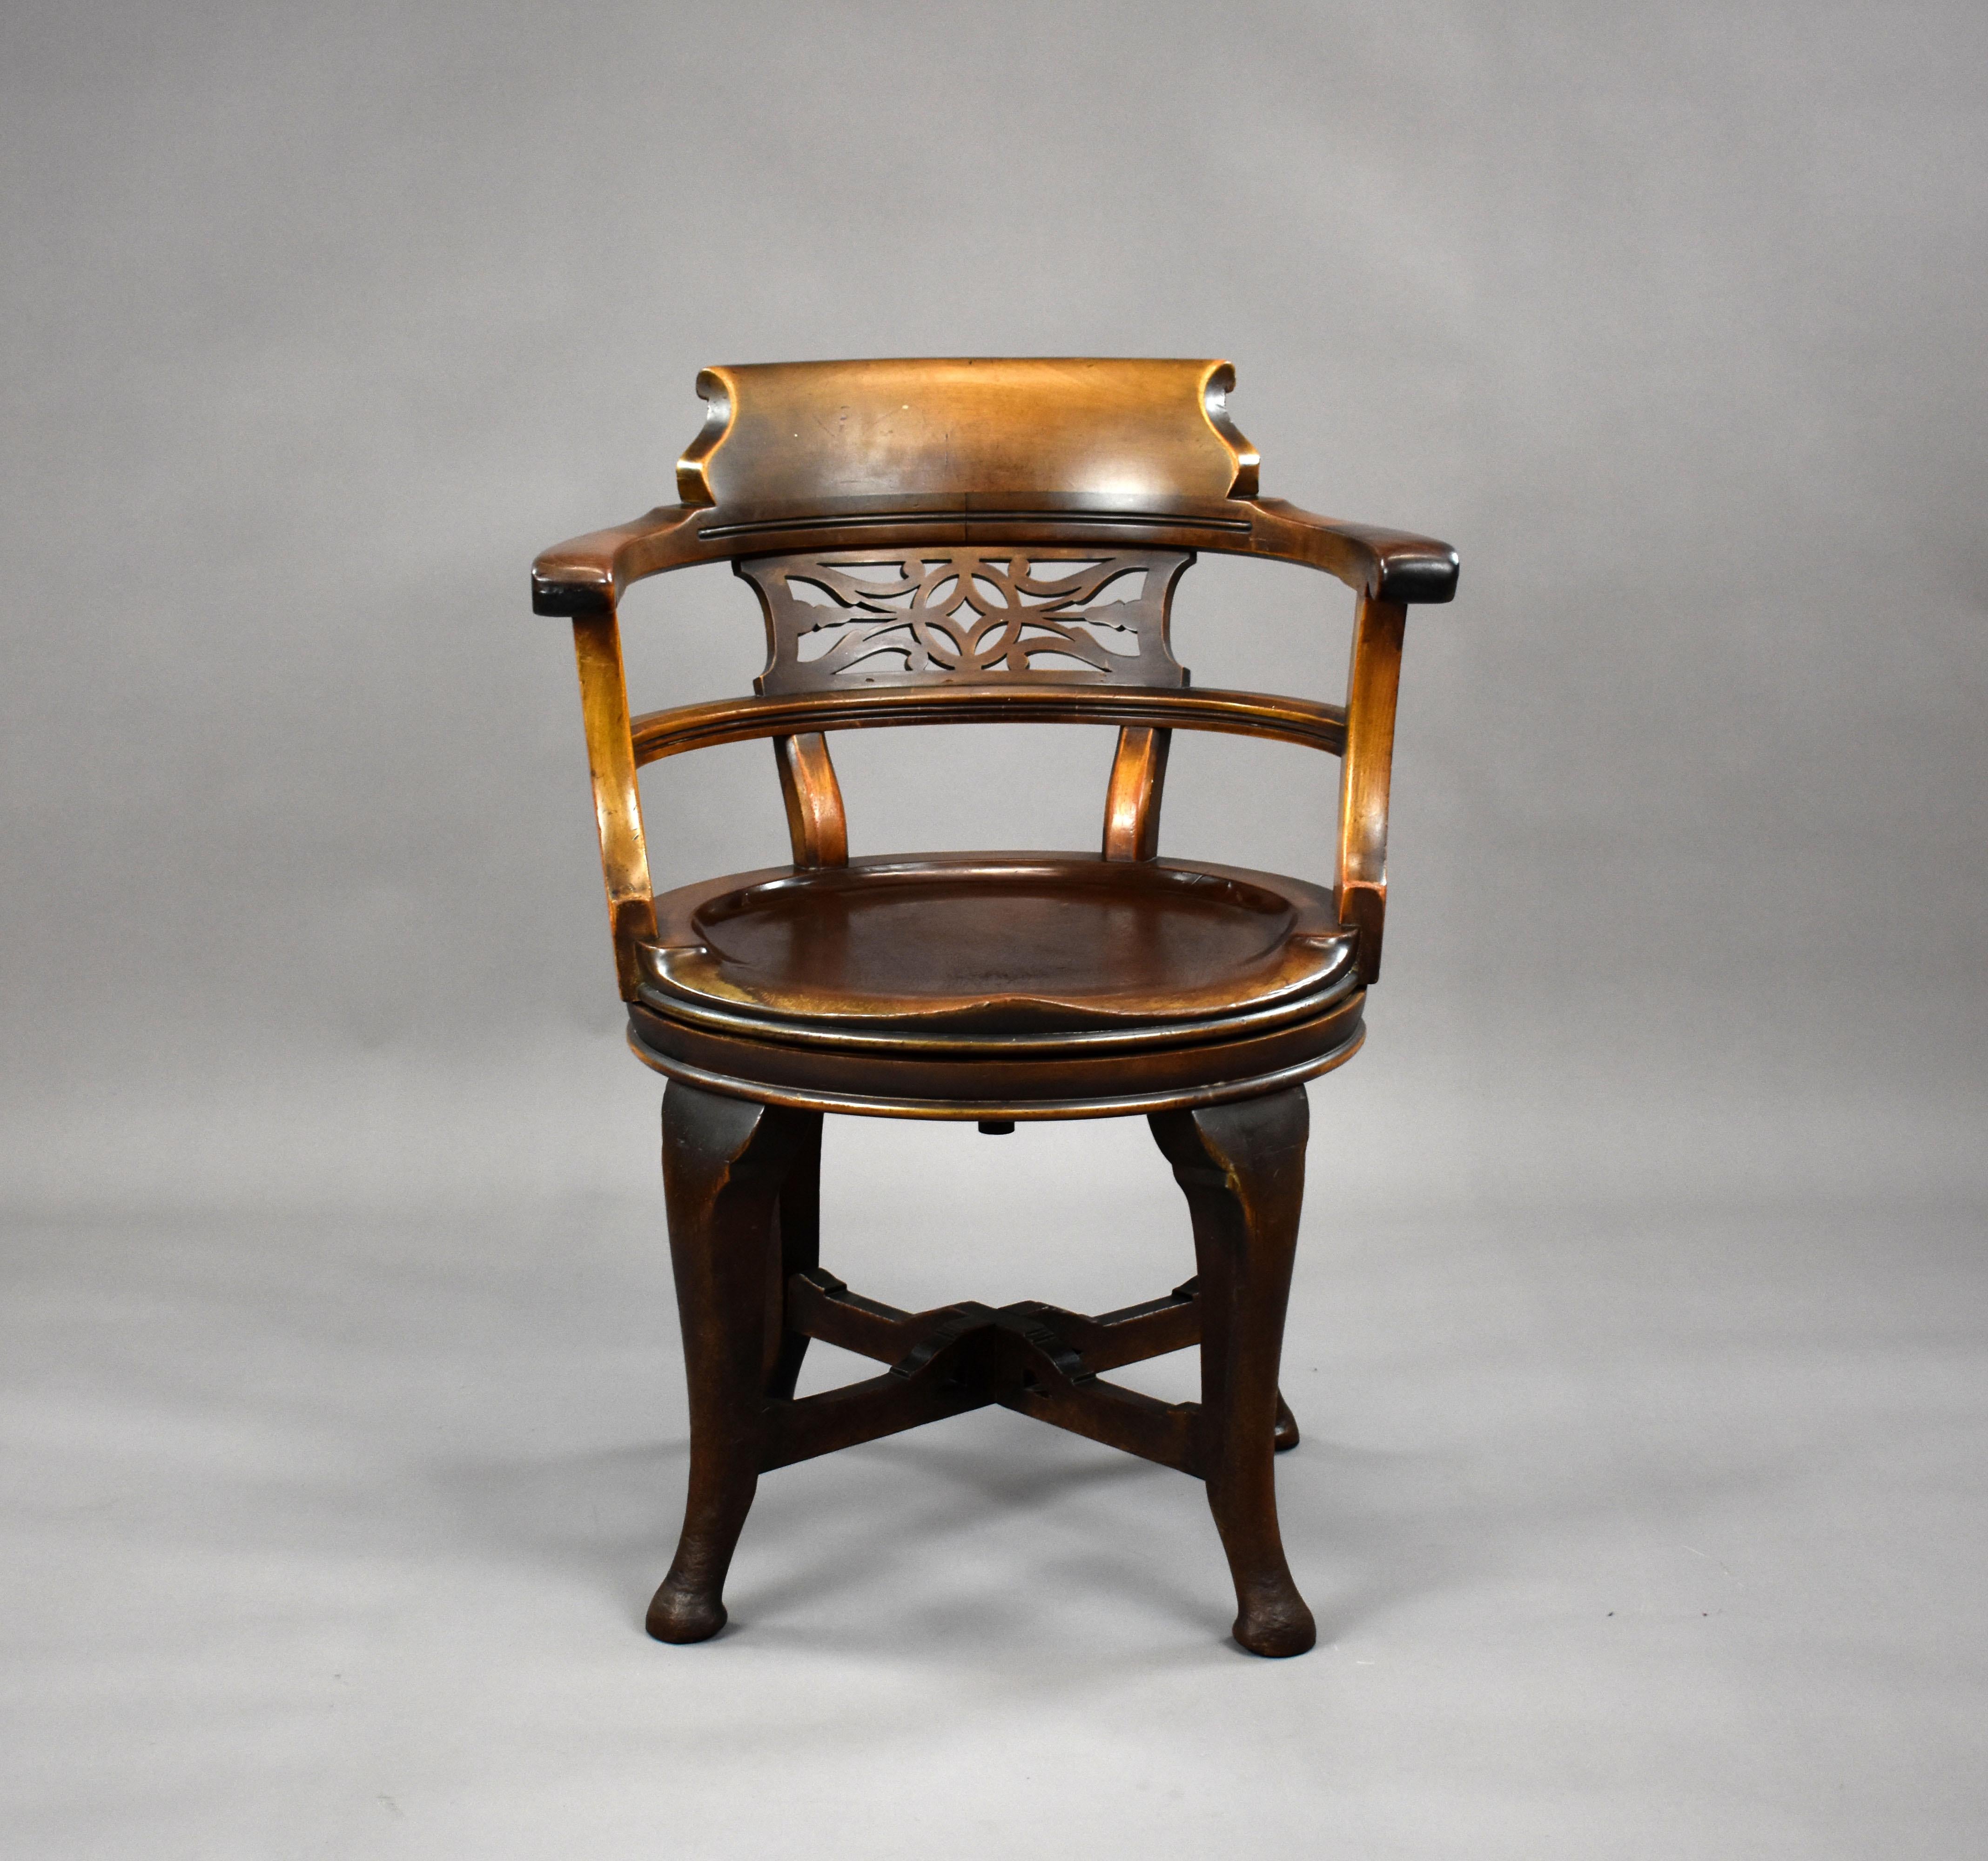 For sale is a good quality Edwardian mahogany revolving desk chair, with a bowed back centred by a pierced panel above a saddle seat. The chair stands on cabriole legs united by an x stretcher. The chair remains in good condition for its age showing